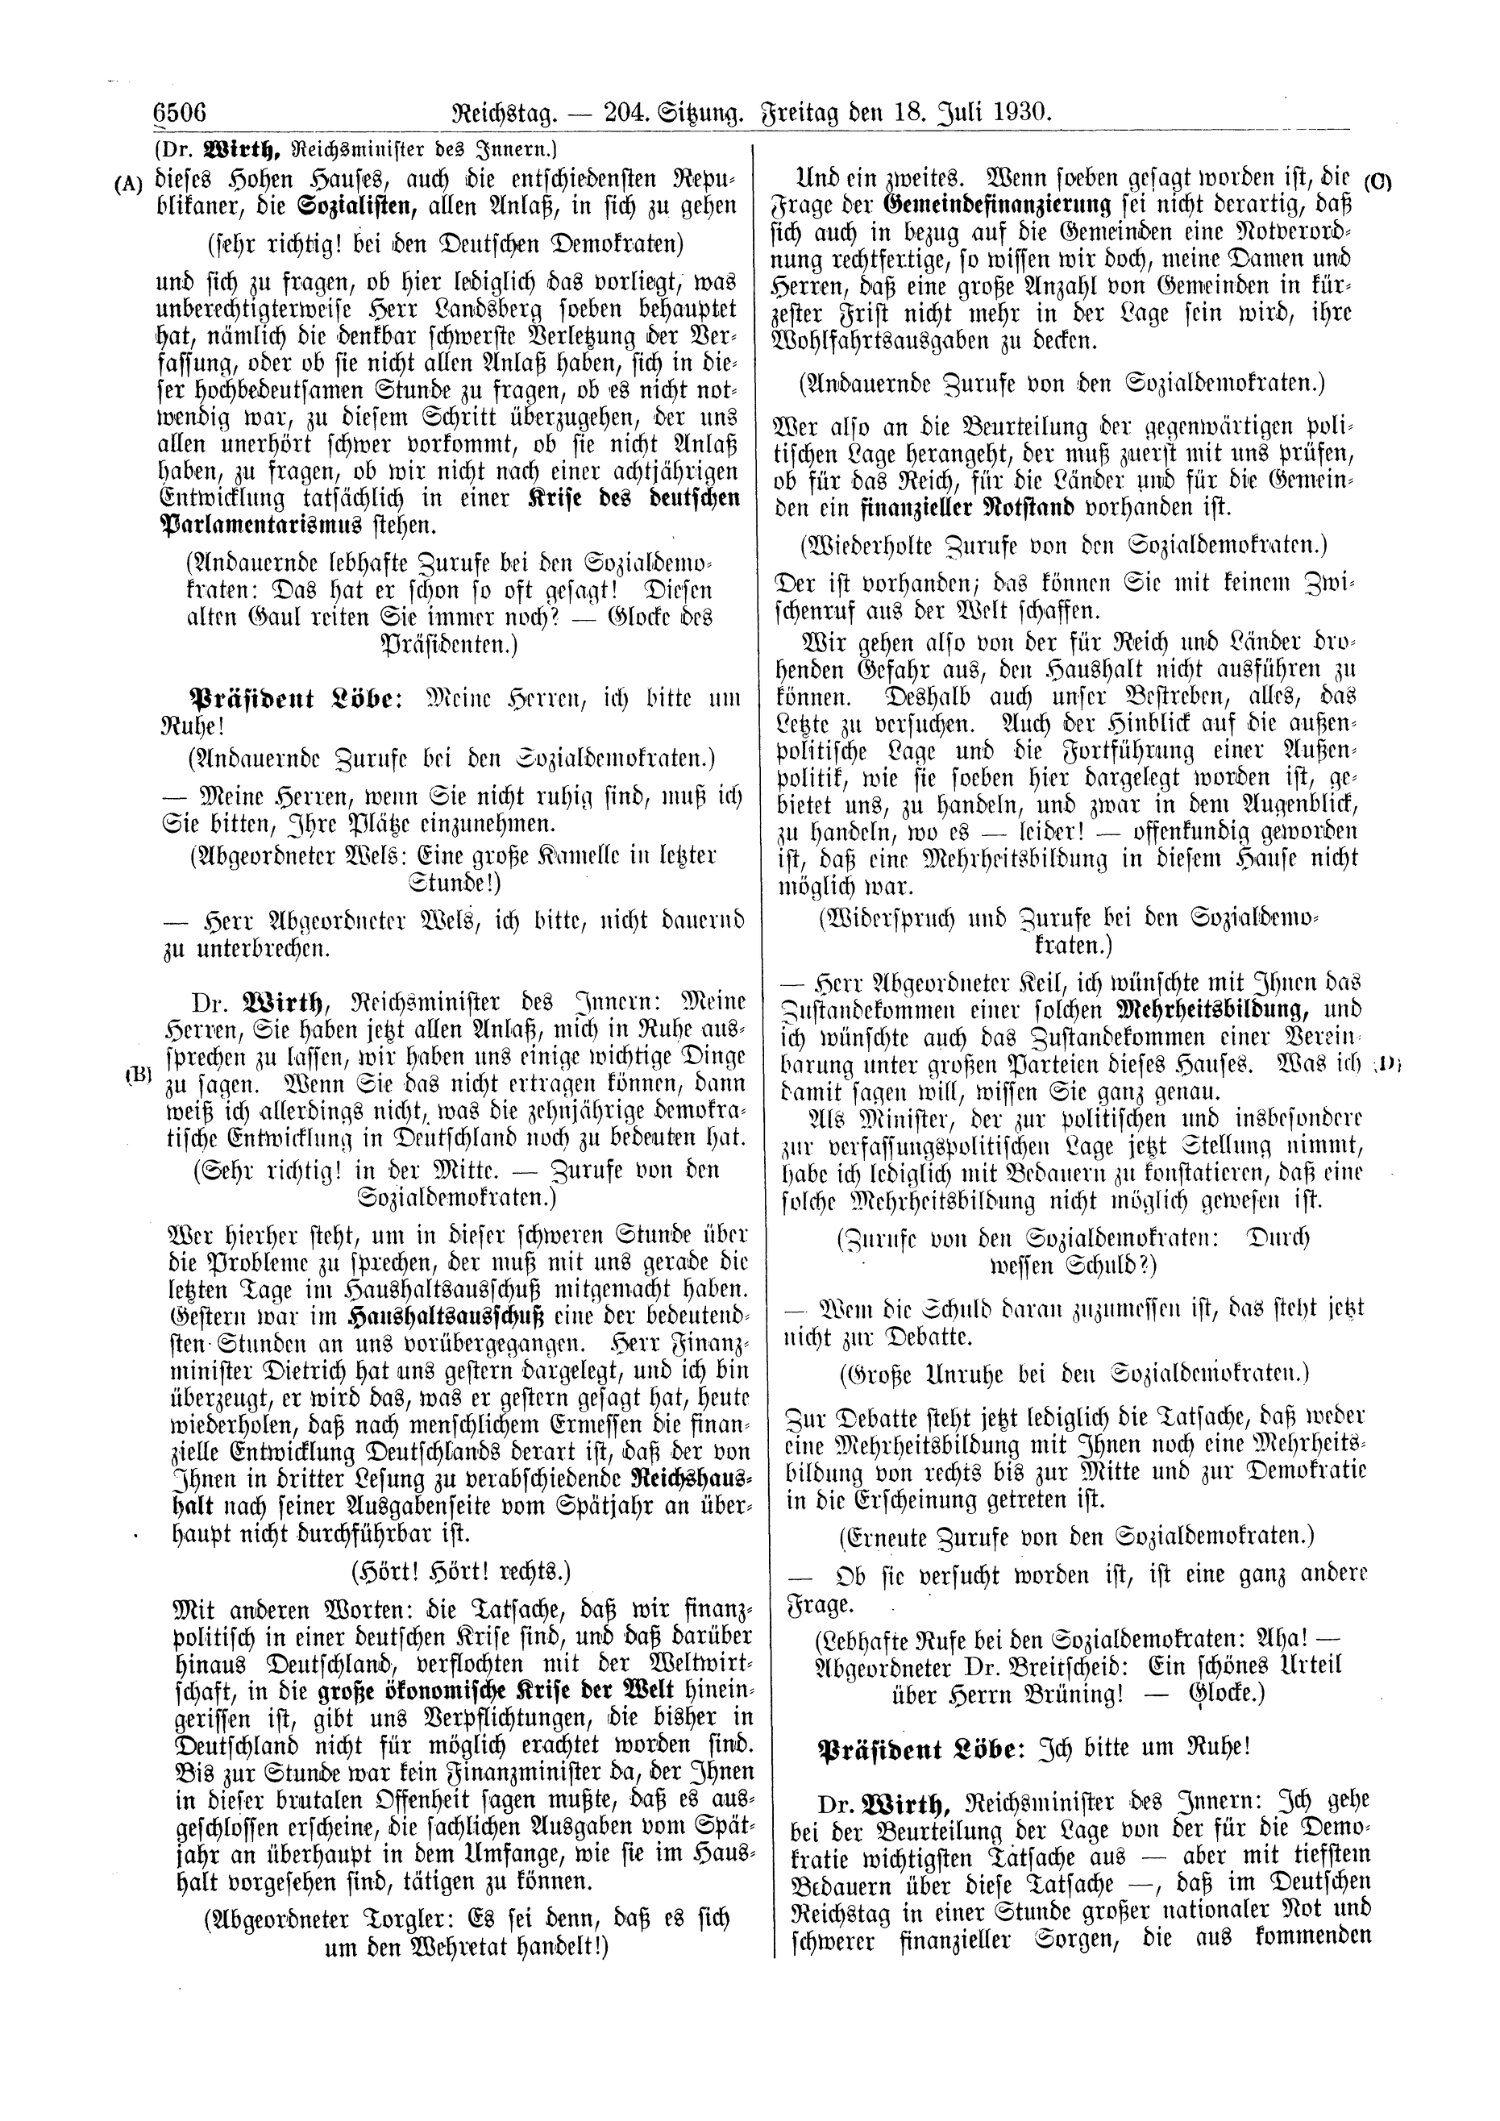 Scan of page 6506